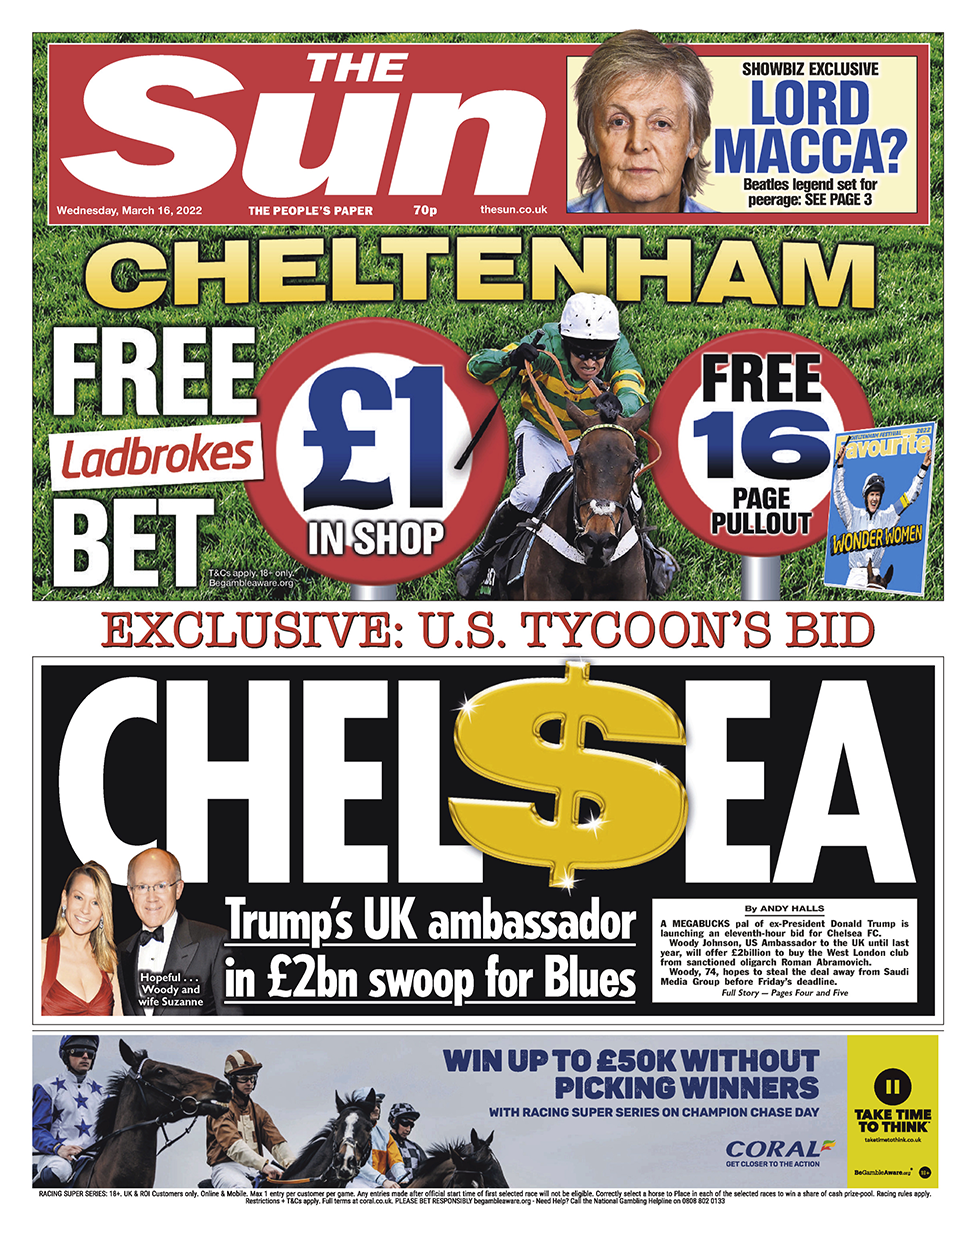 The Sun's front page shows Woody Johnson, the billionaire former US ambassador to the UK, who it says wants to make a last-minute bid to buy Chelsea.